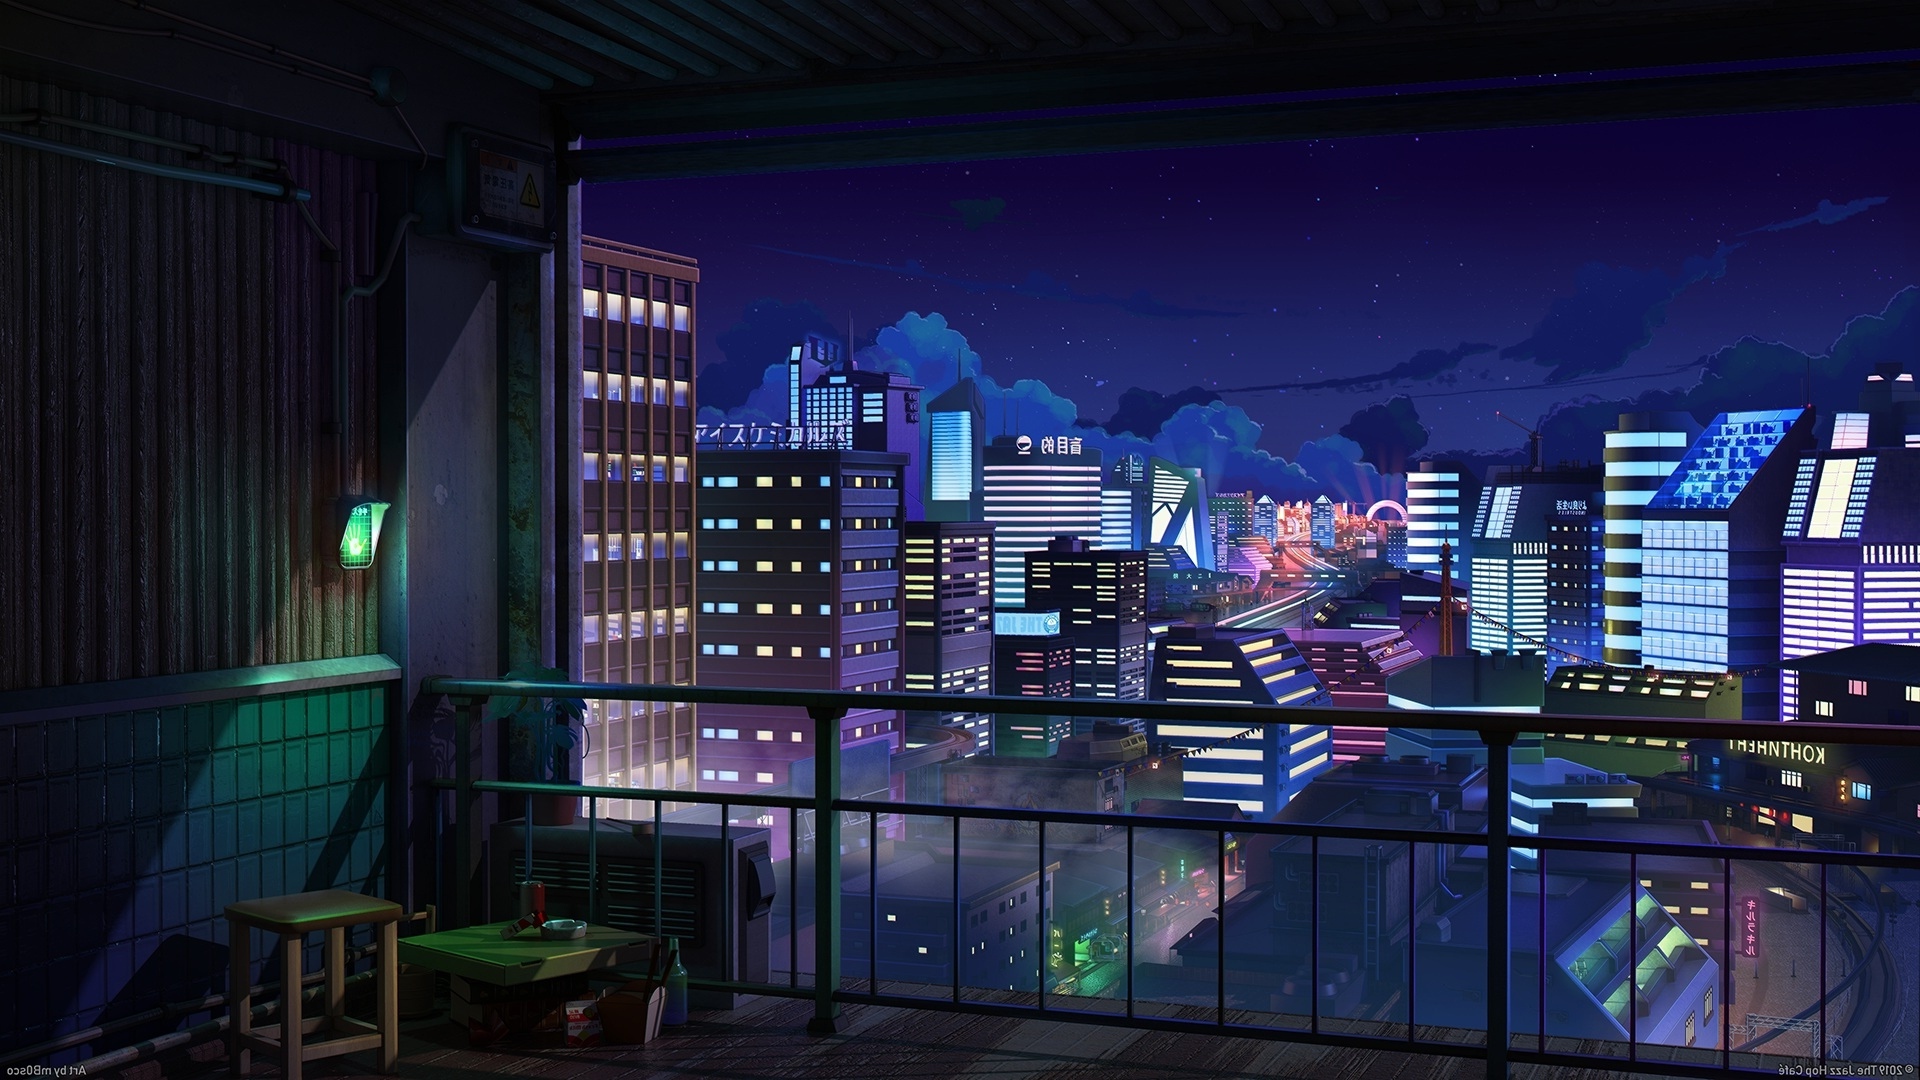 Anime Girl In Balcony Cityscape Sea And Sunset Wallpapers